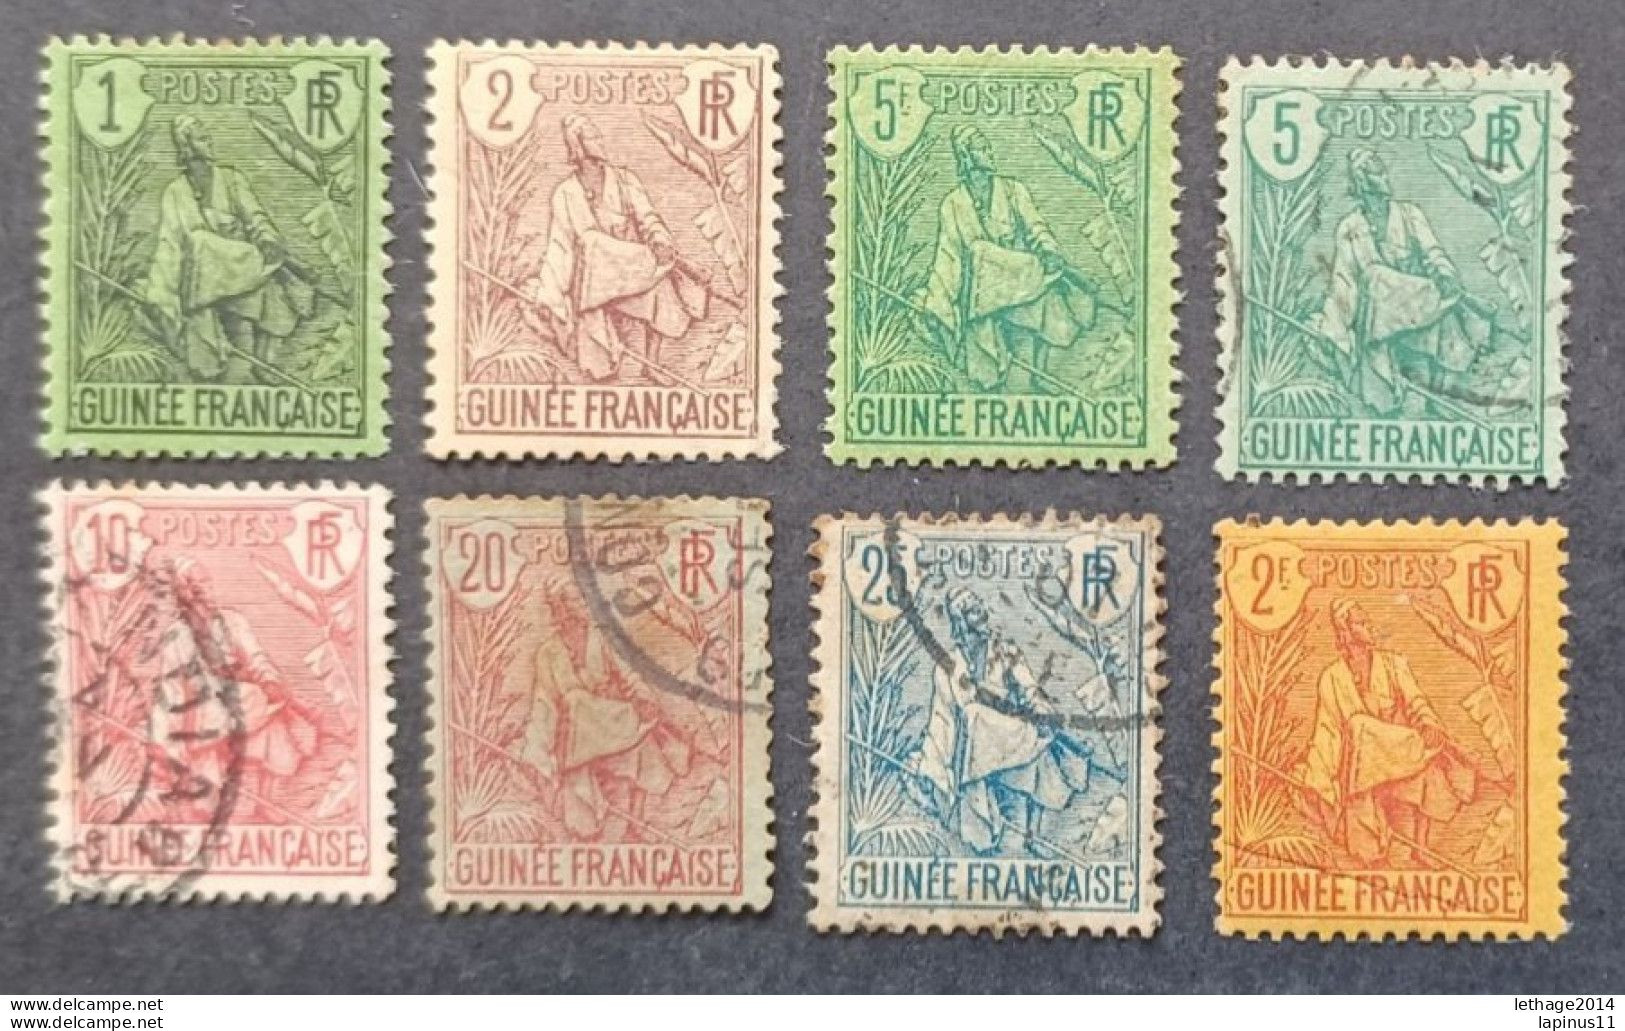 COLONIE FRANCE GUINEE FRANCAISE 1904 BERGER PULAS CAT YVERT N 18-19-21-36-22-38-25---(31 MNH) MNH MNHLOBLITERE - Used Stamps